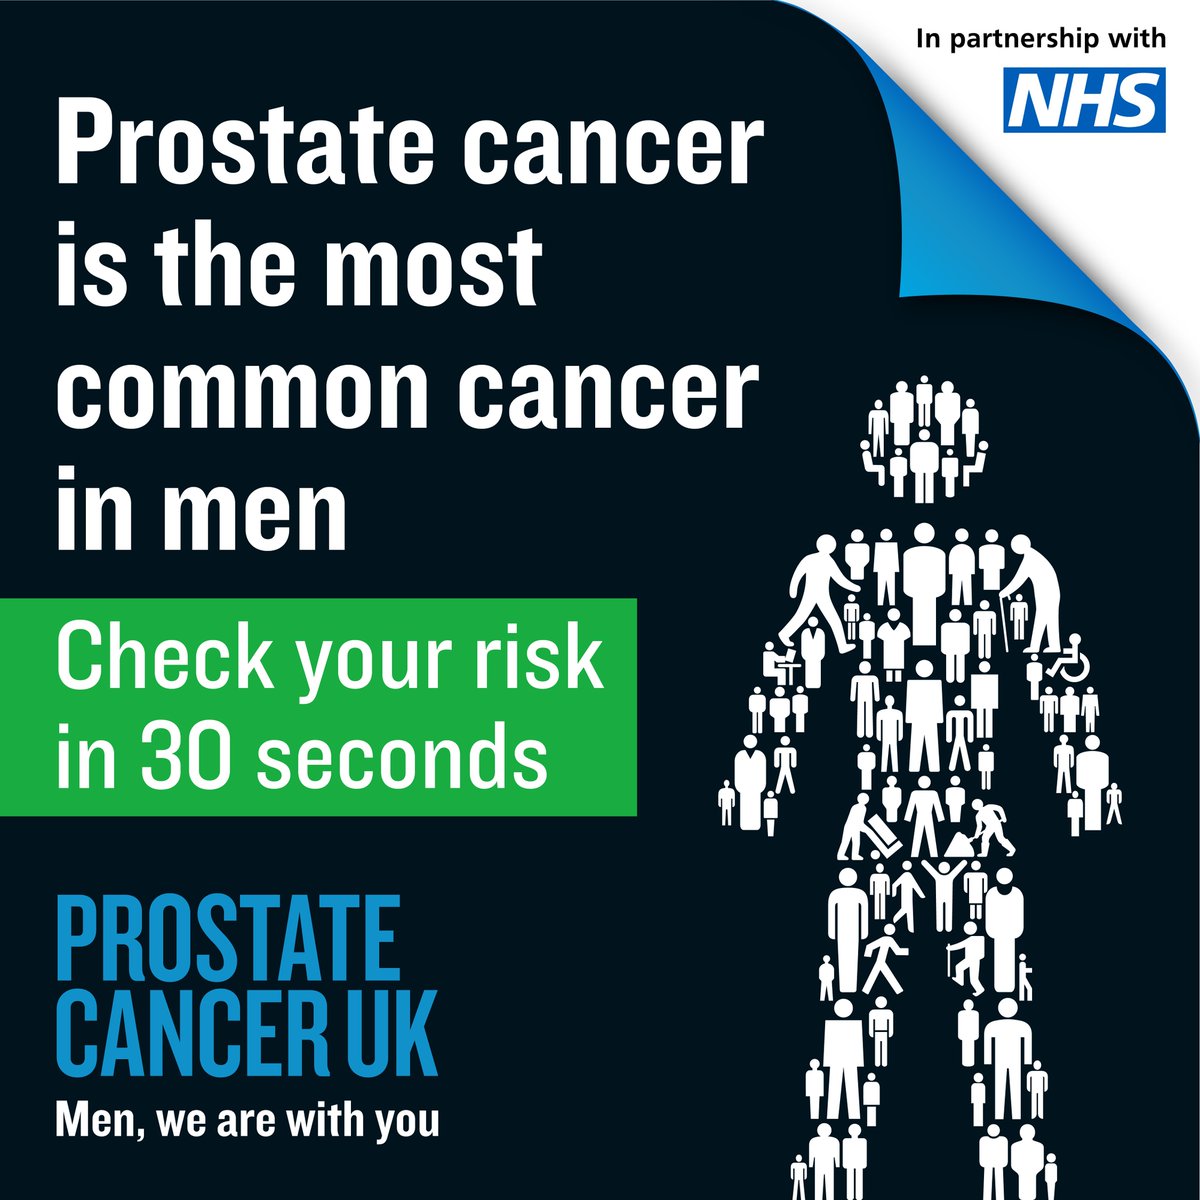 Most men with early prostate cancer do not have any symptoms.  This is why it is important to know your risk:  prostatecanceruk.org/risk-checker #prostatecancer #menwearewithyou #menshealth #chestercentralpcn #nhs #chestergp